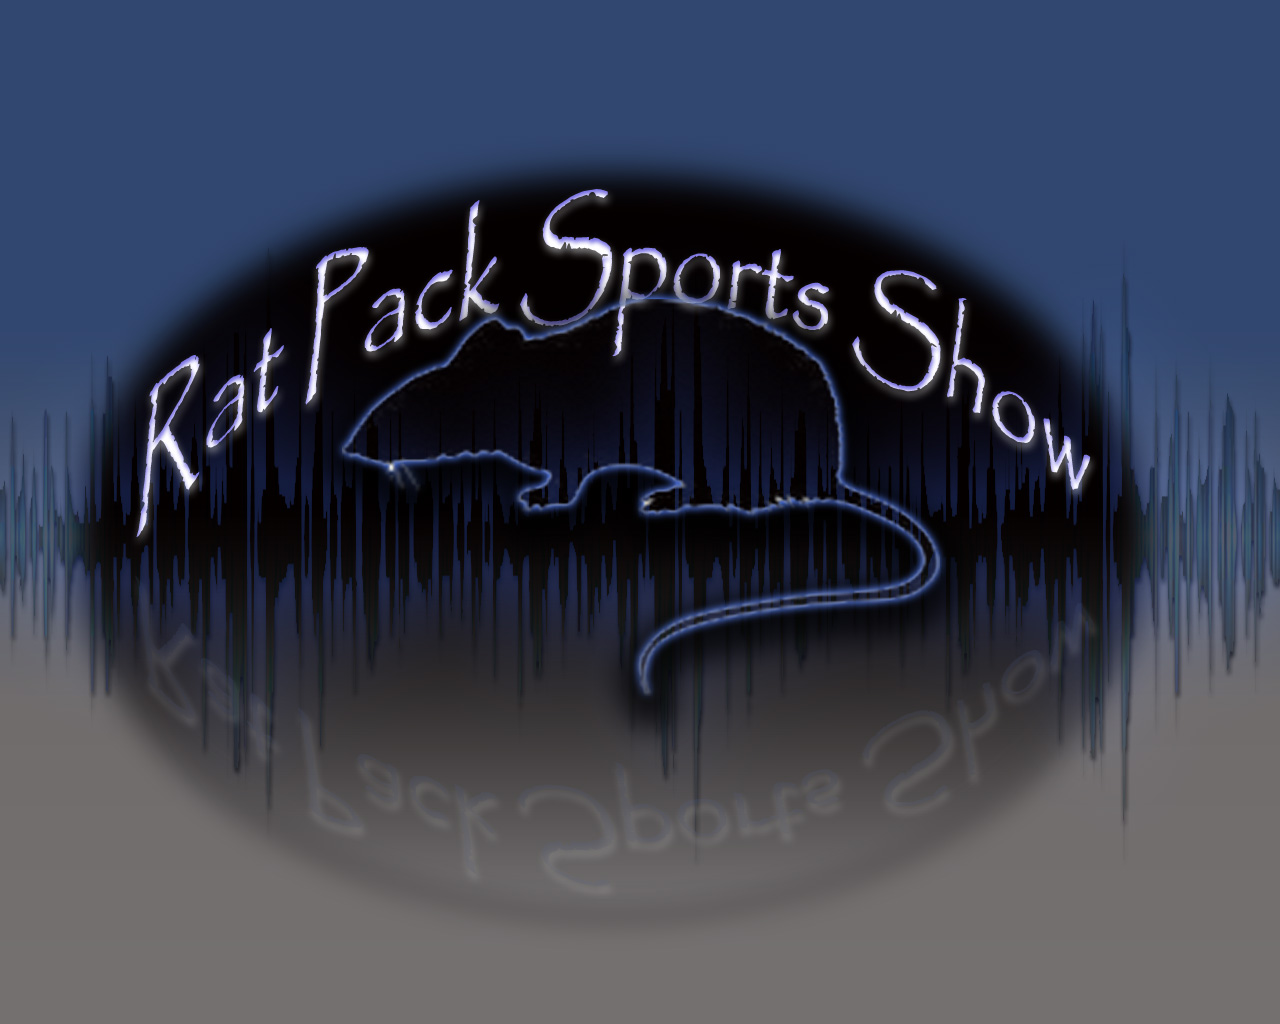 Rat Pack Sports Show PodCast